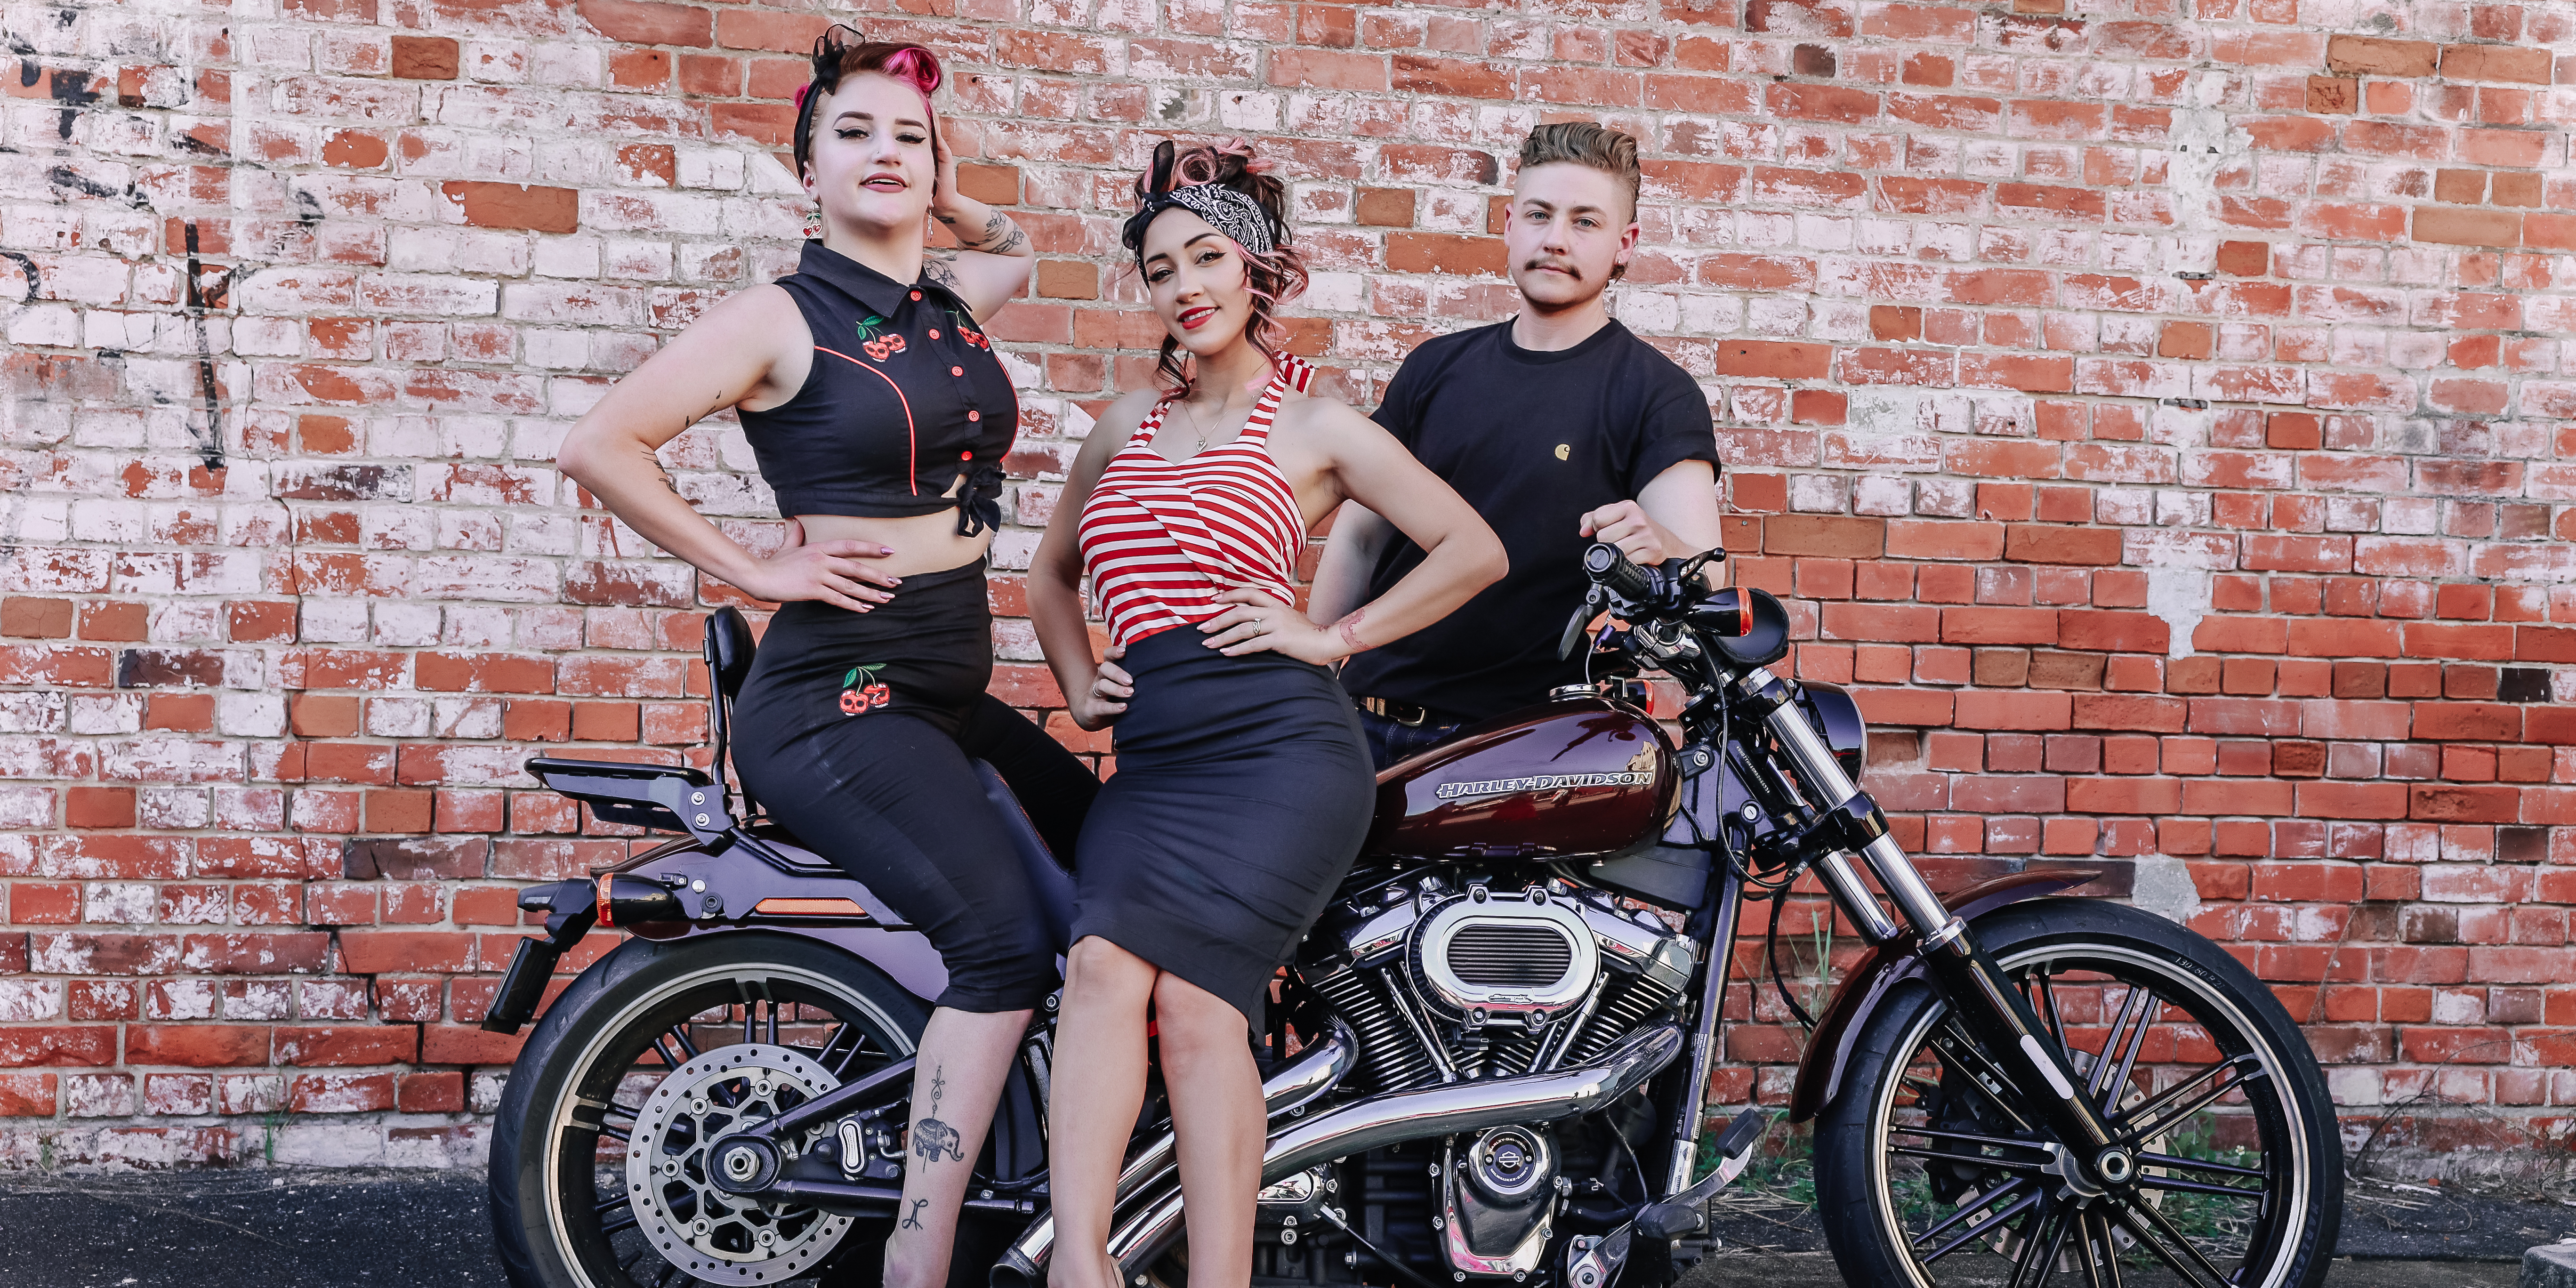 Two women dressed in pinup clothing sitting on a motorcycle and a gentleman standing behind